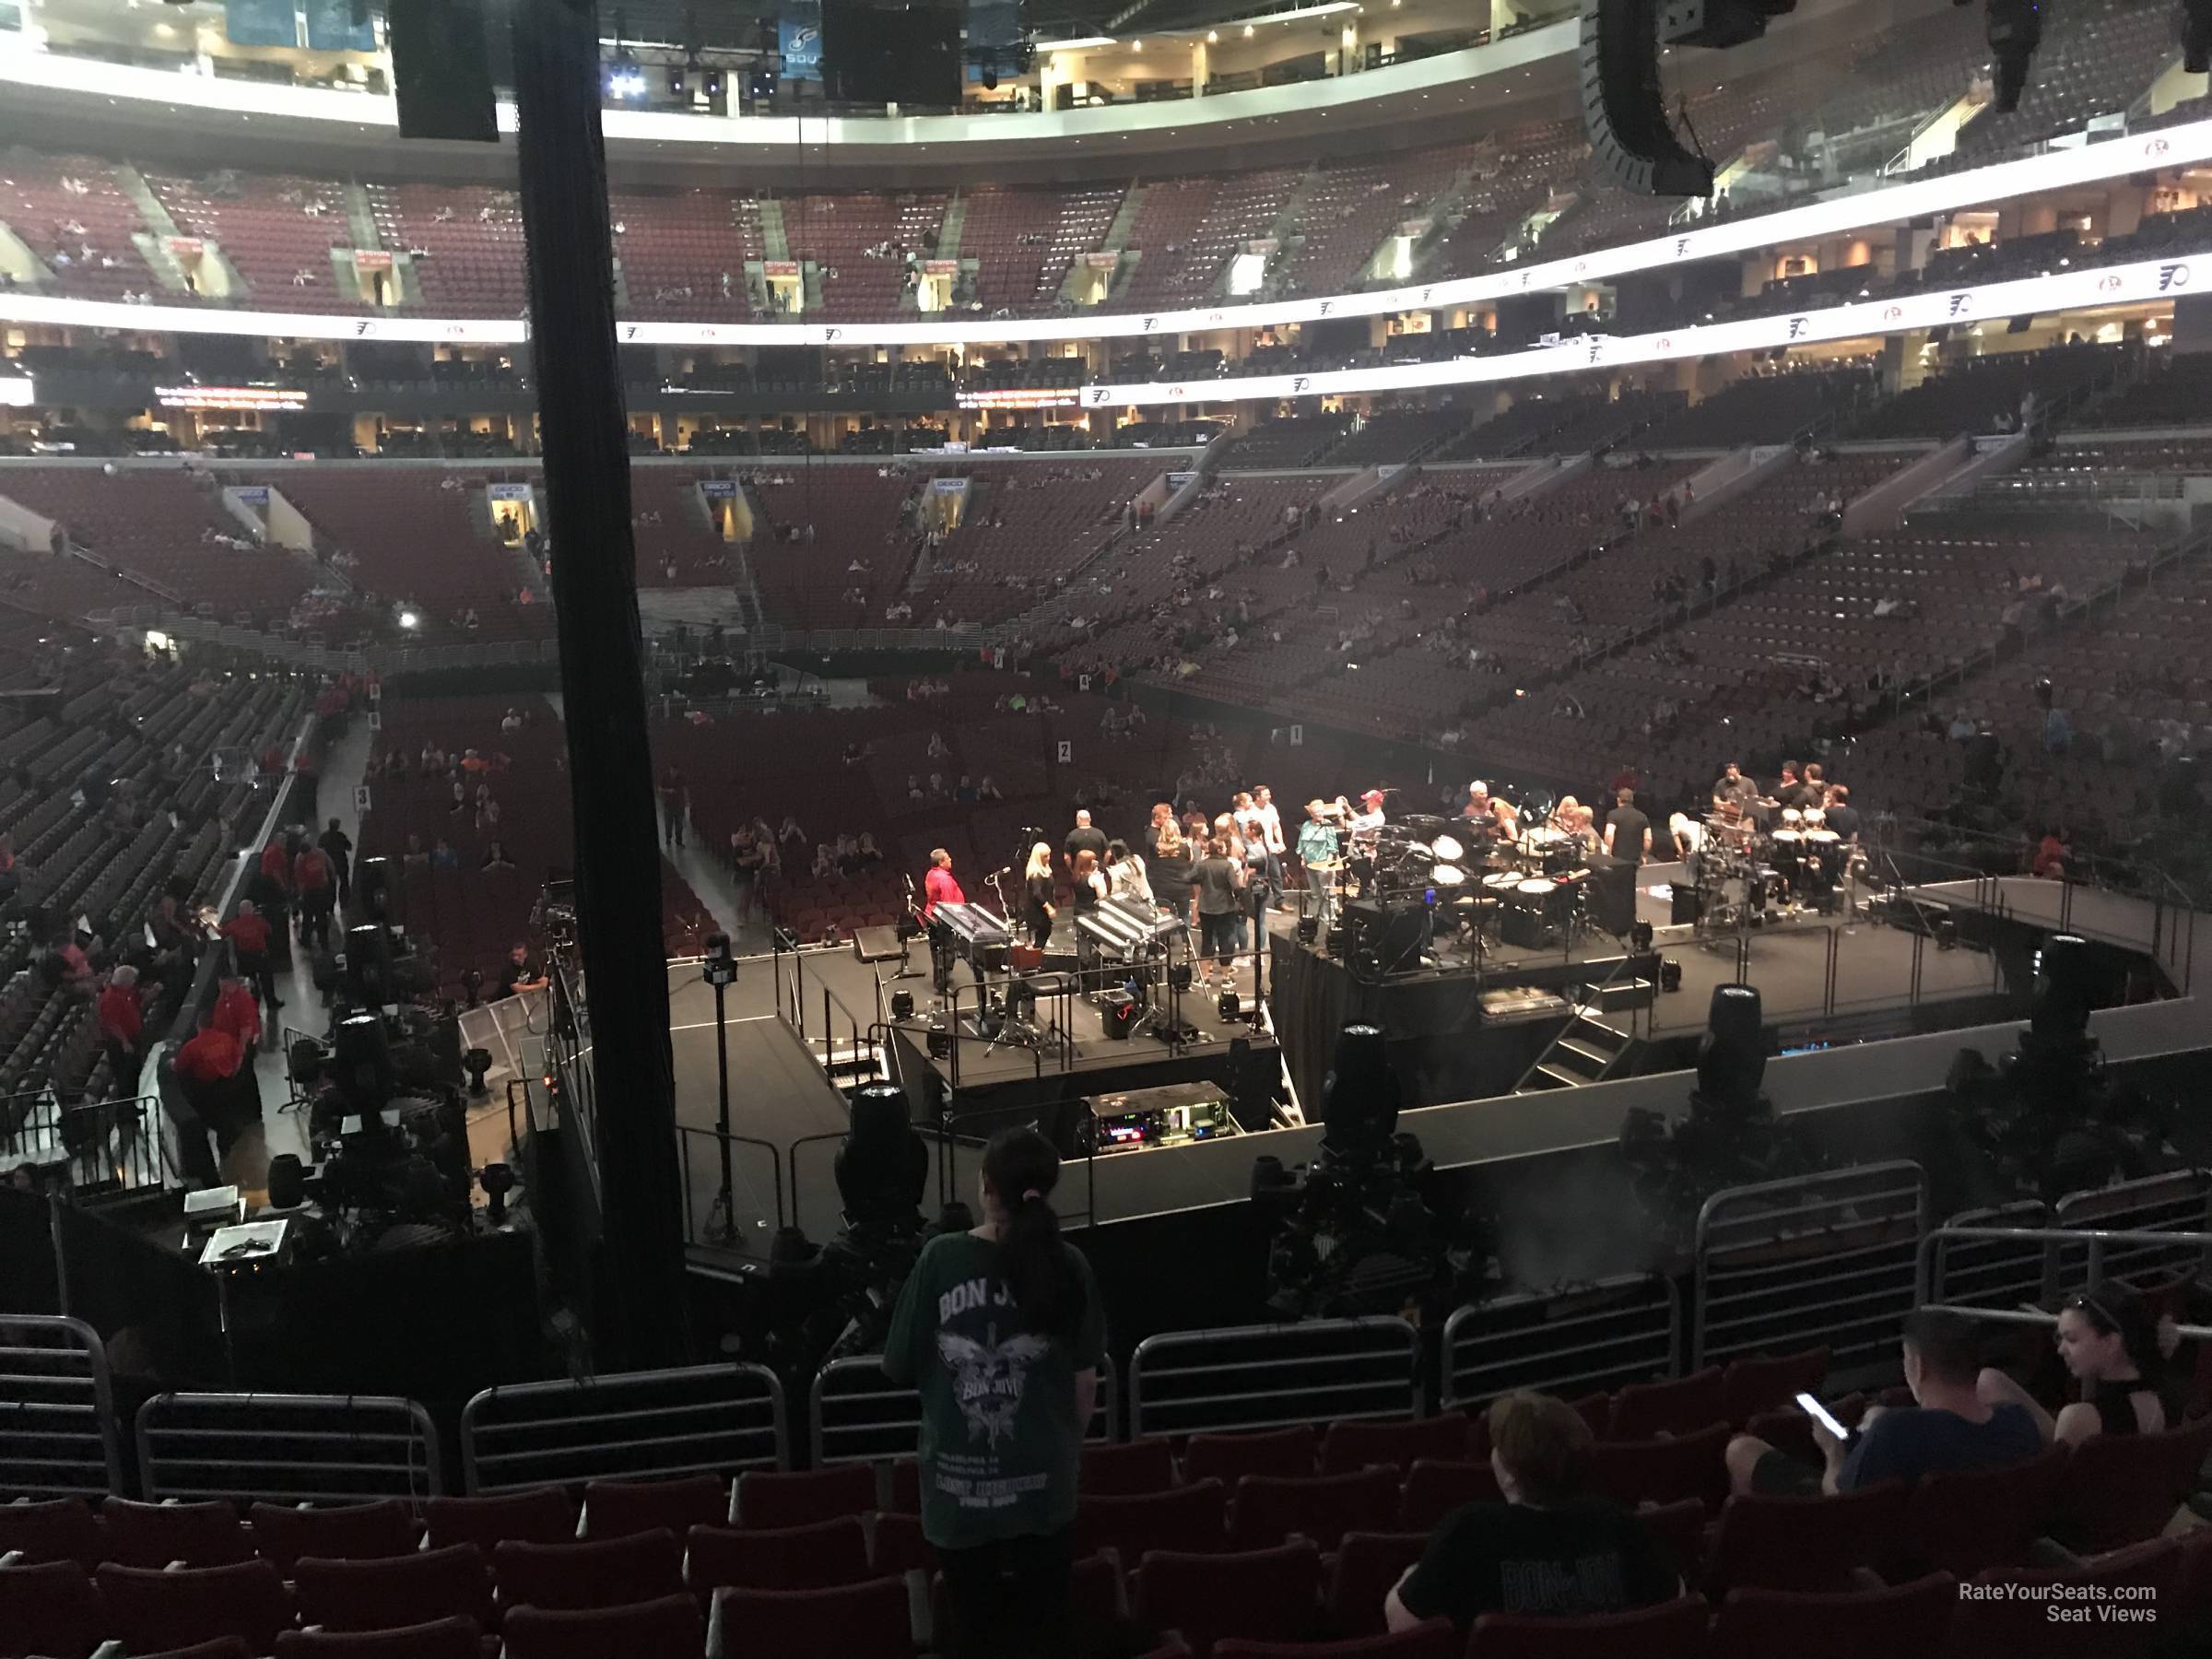 section 118, row 17 seat view  for concert - wells fargo center